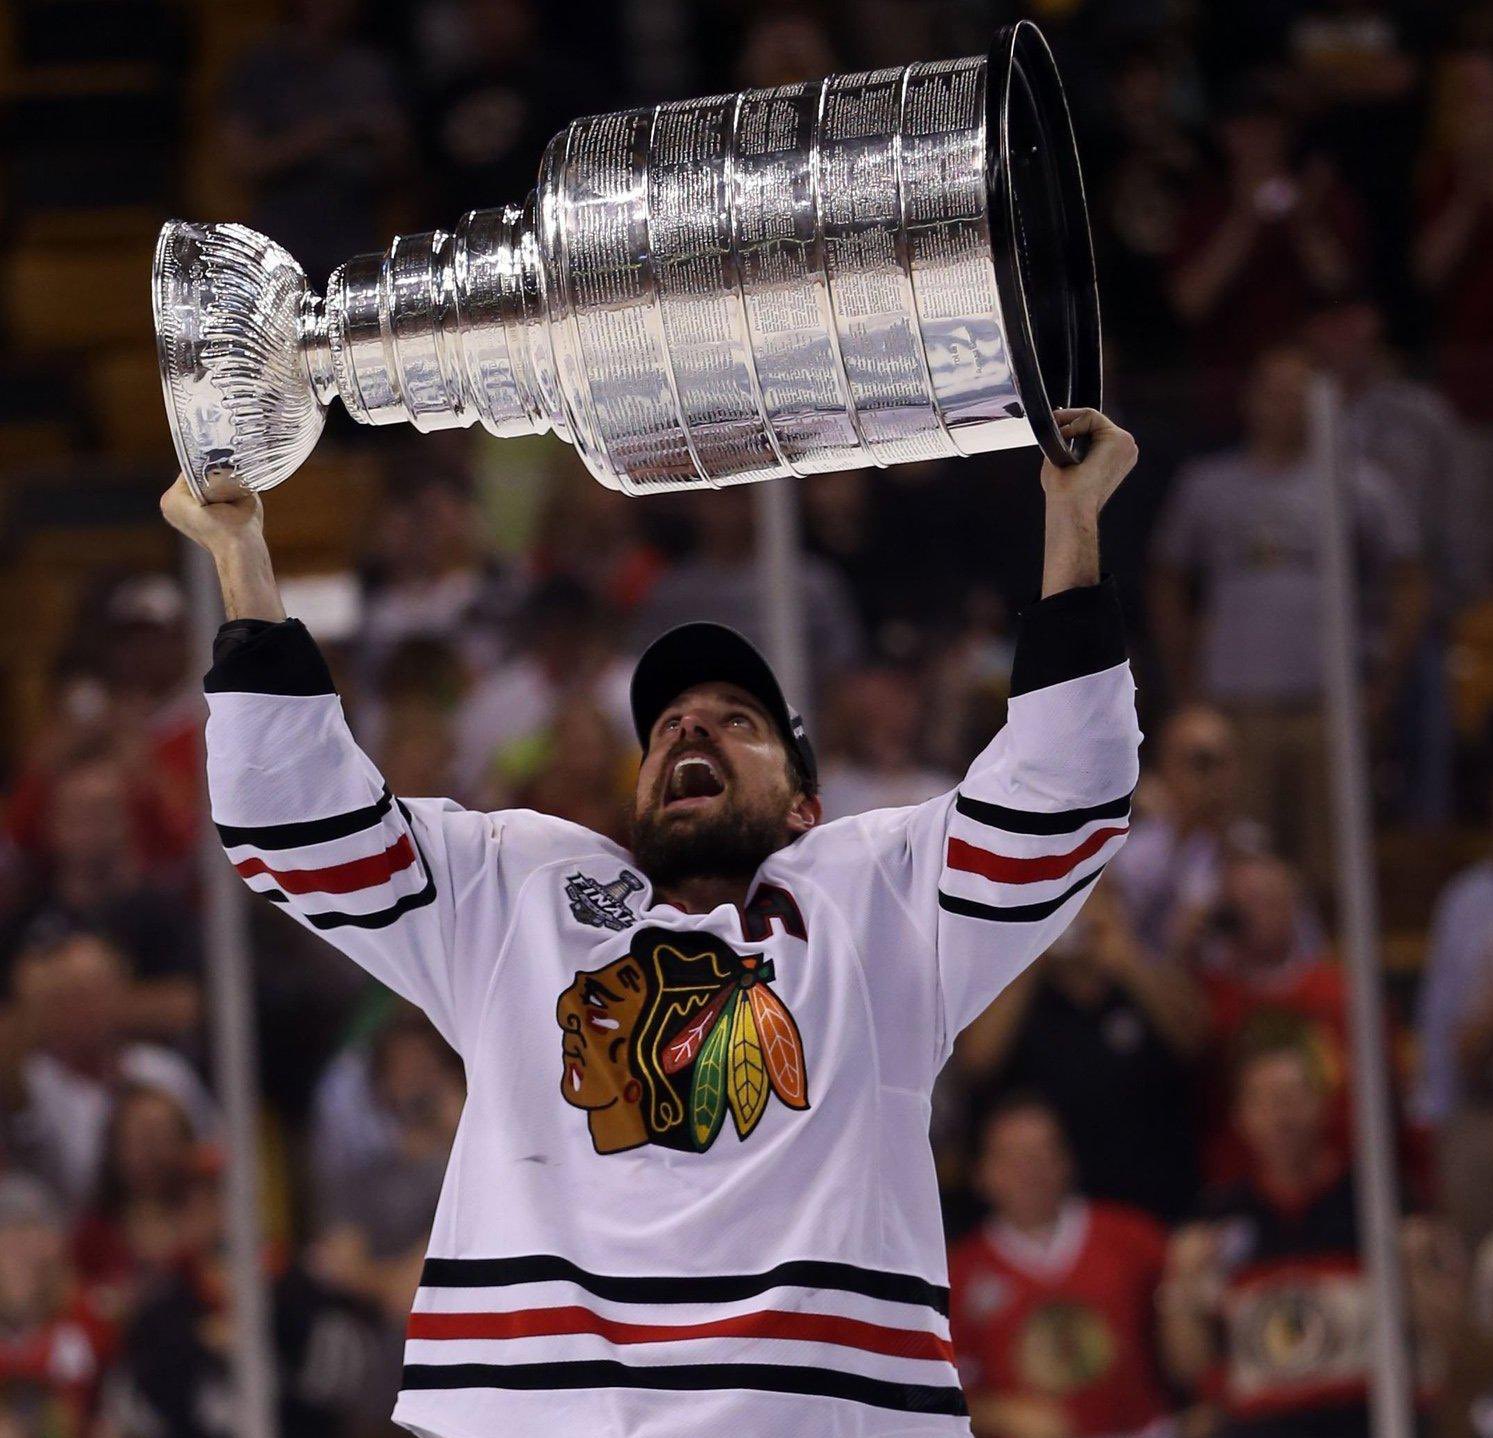 Happy 39th Birthday to legend and 3x Stanley Cup Champion Patrick Sharp! 